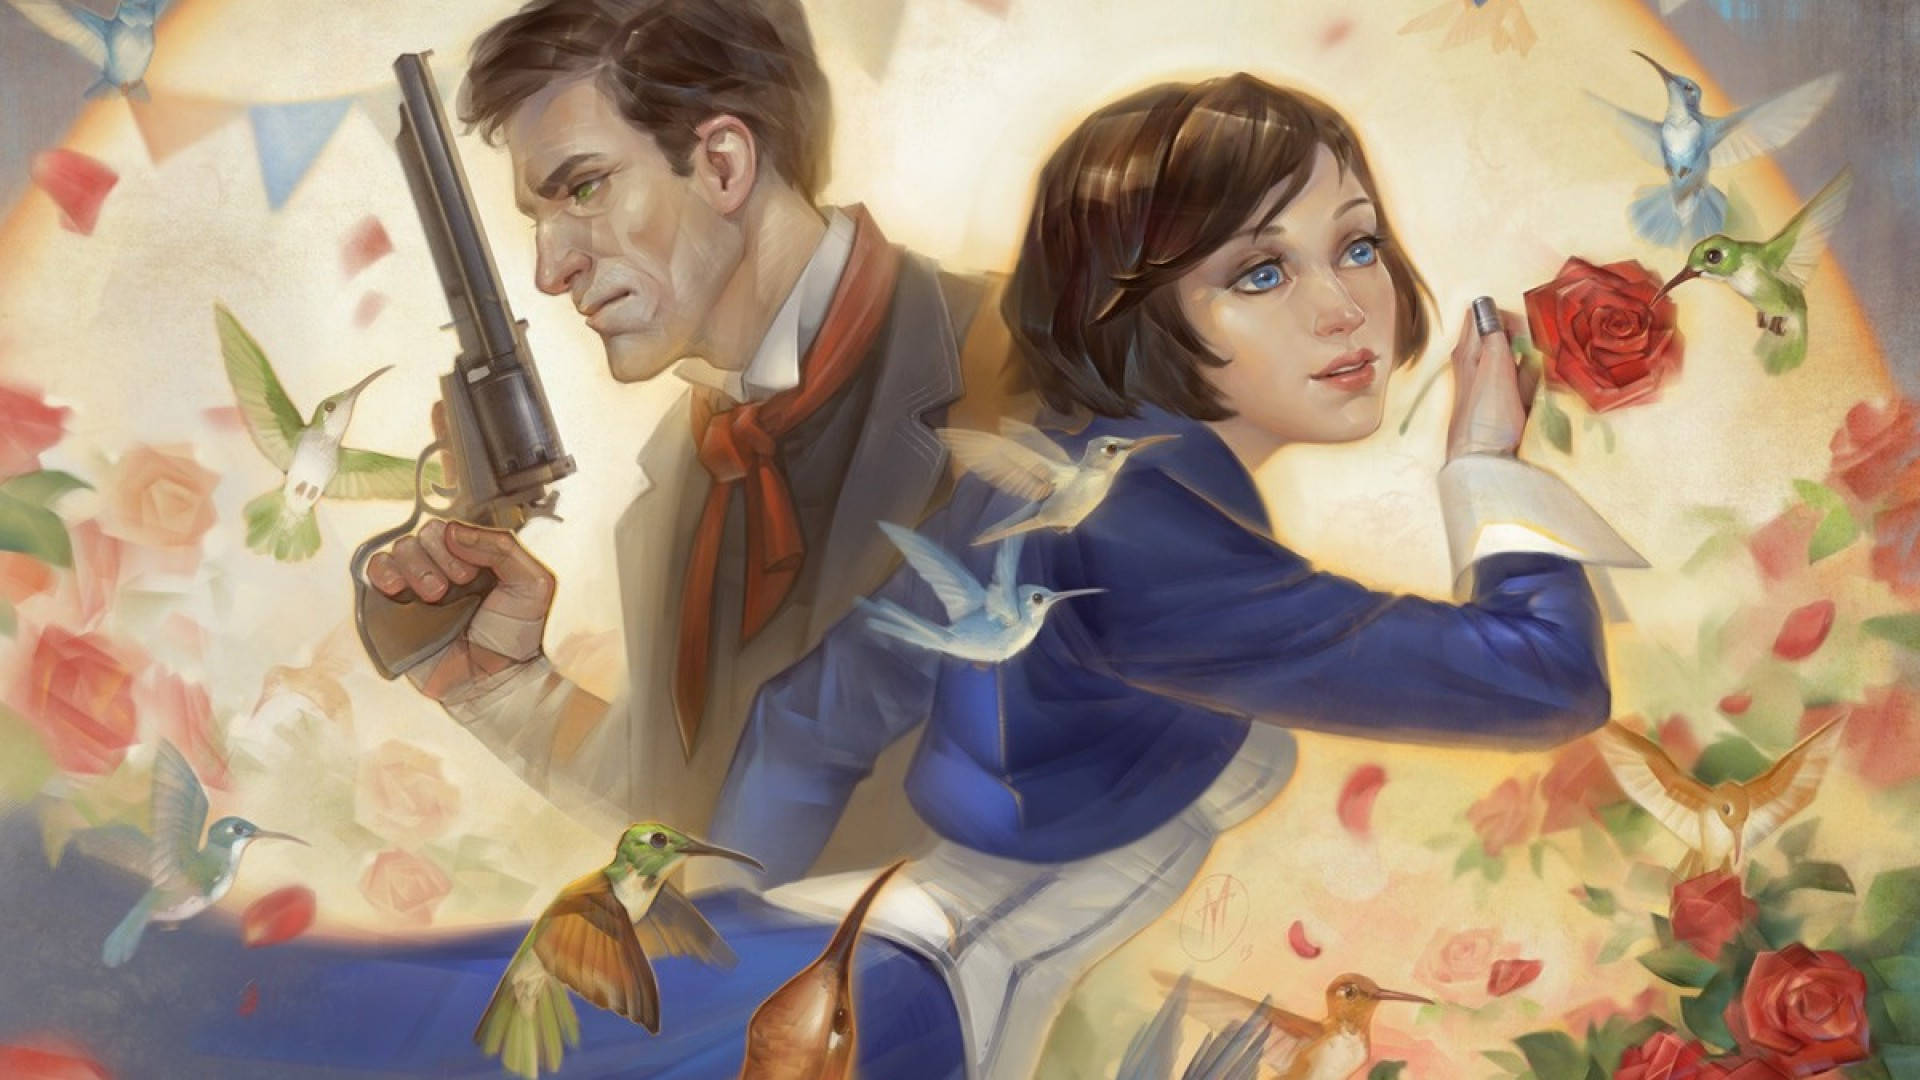 Immerse yourself in the magnificent world of Bioshock Infinite Wallpaper